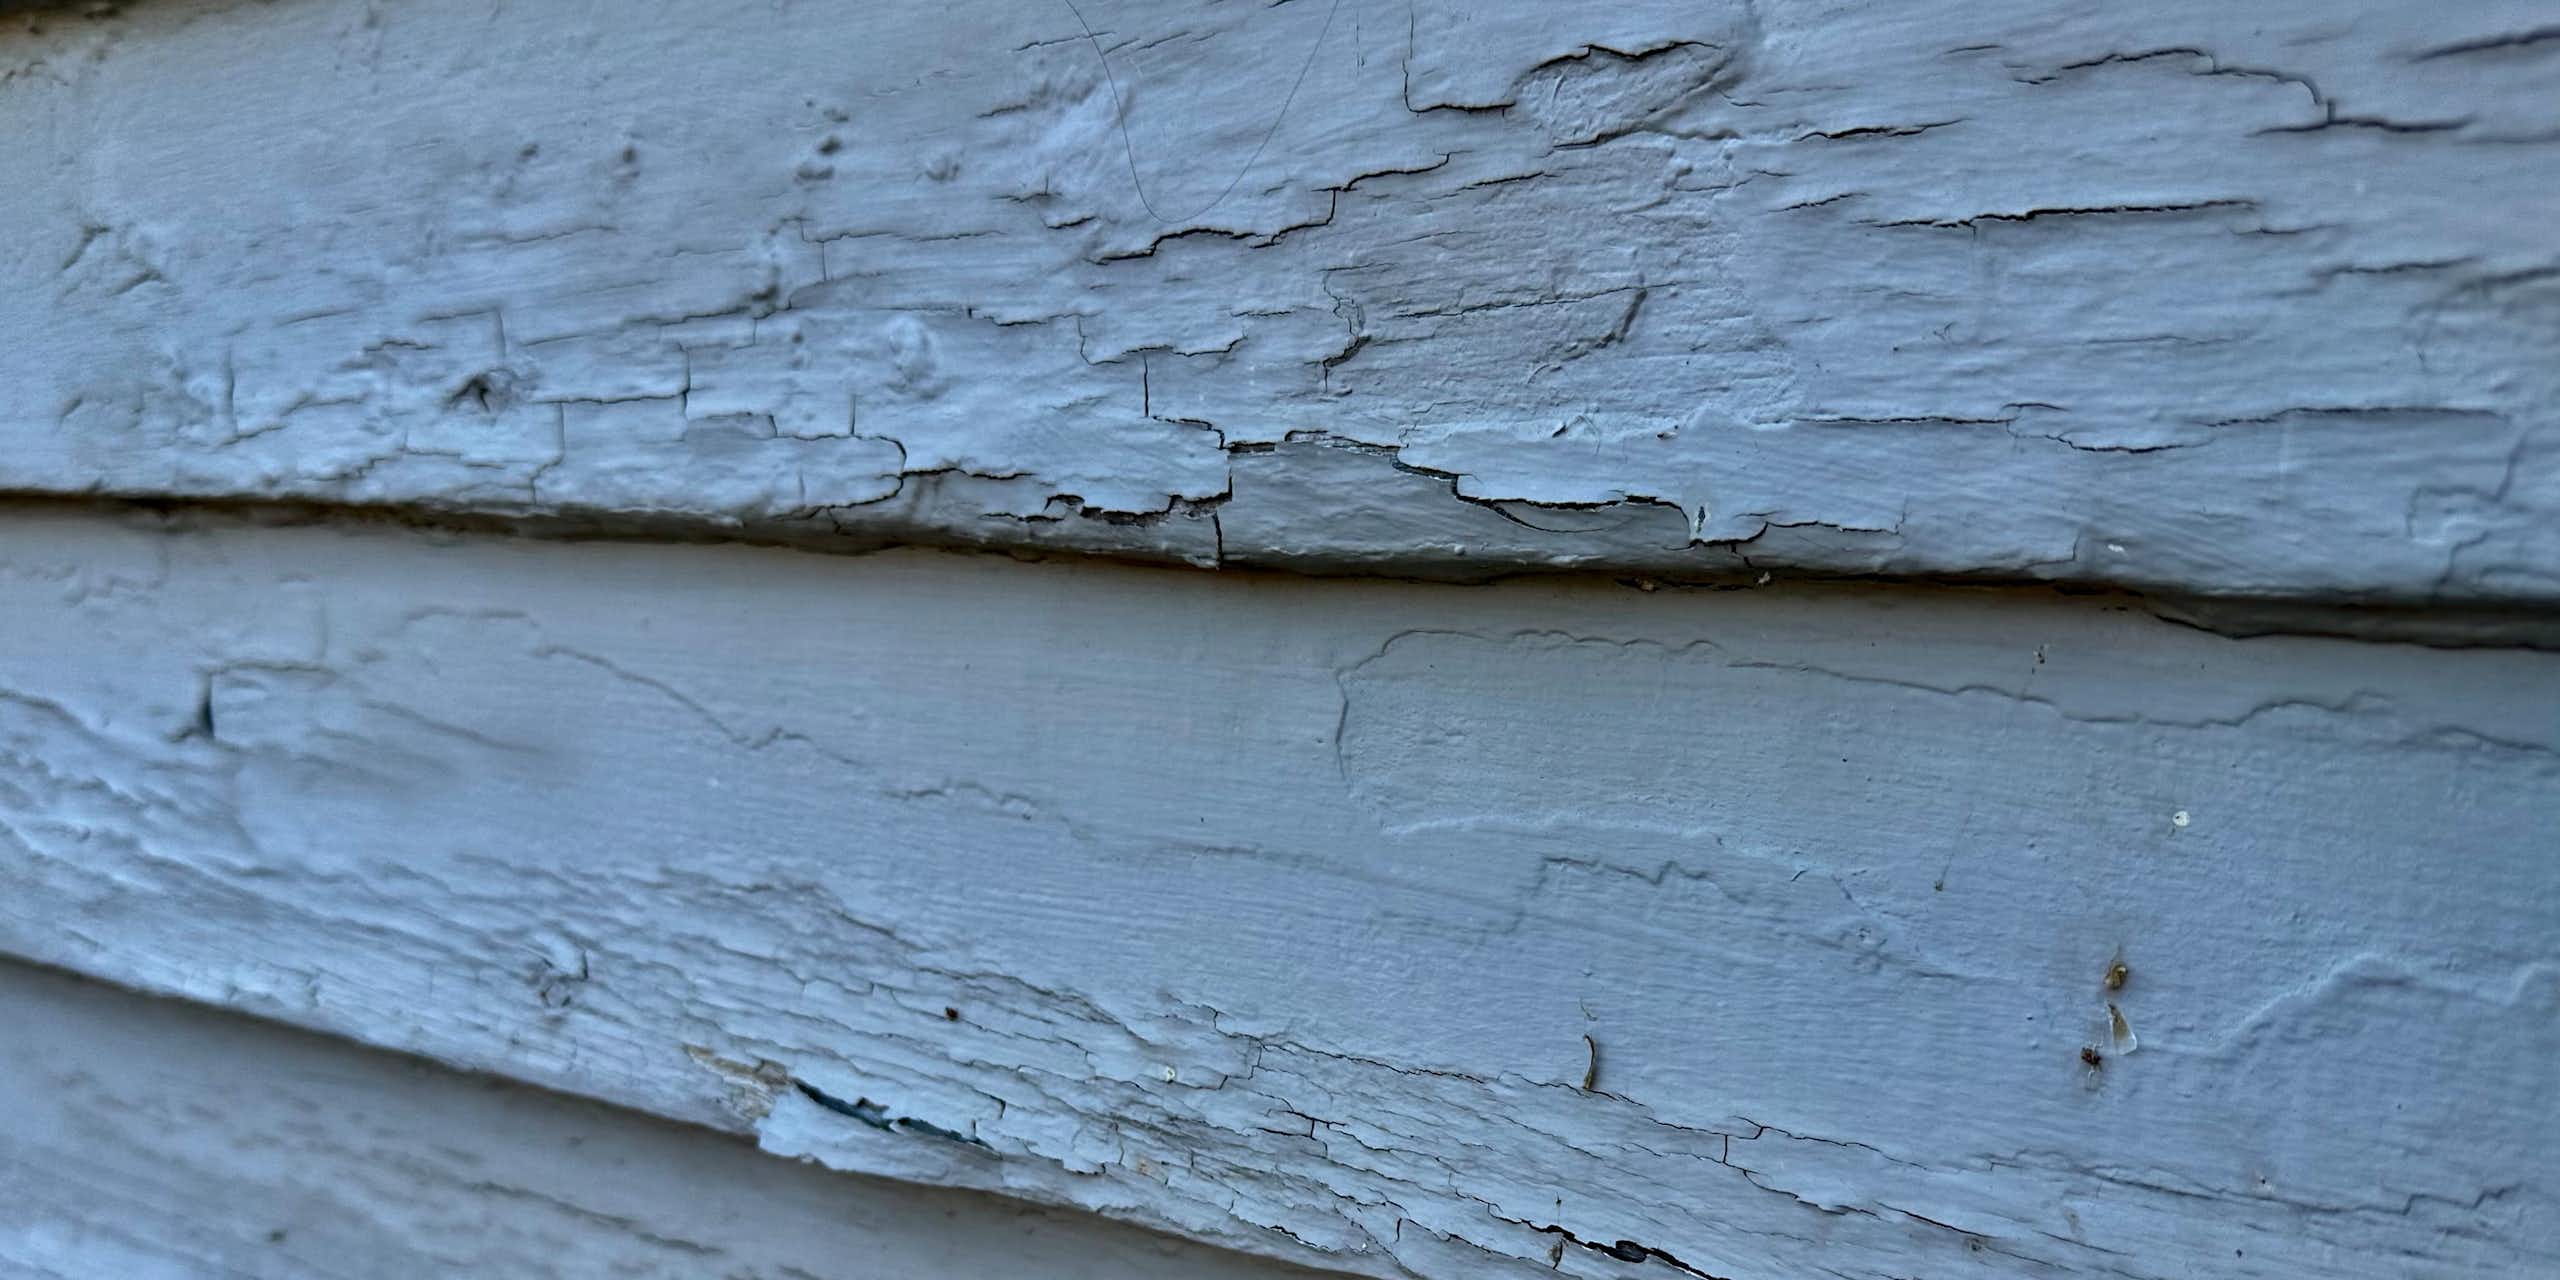 The exterior of a house, showing cracked and blistered blue paint.